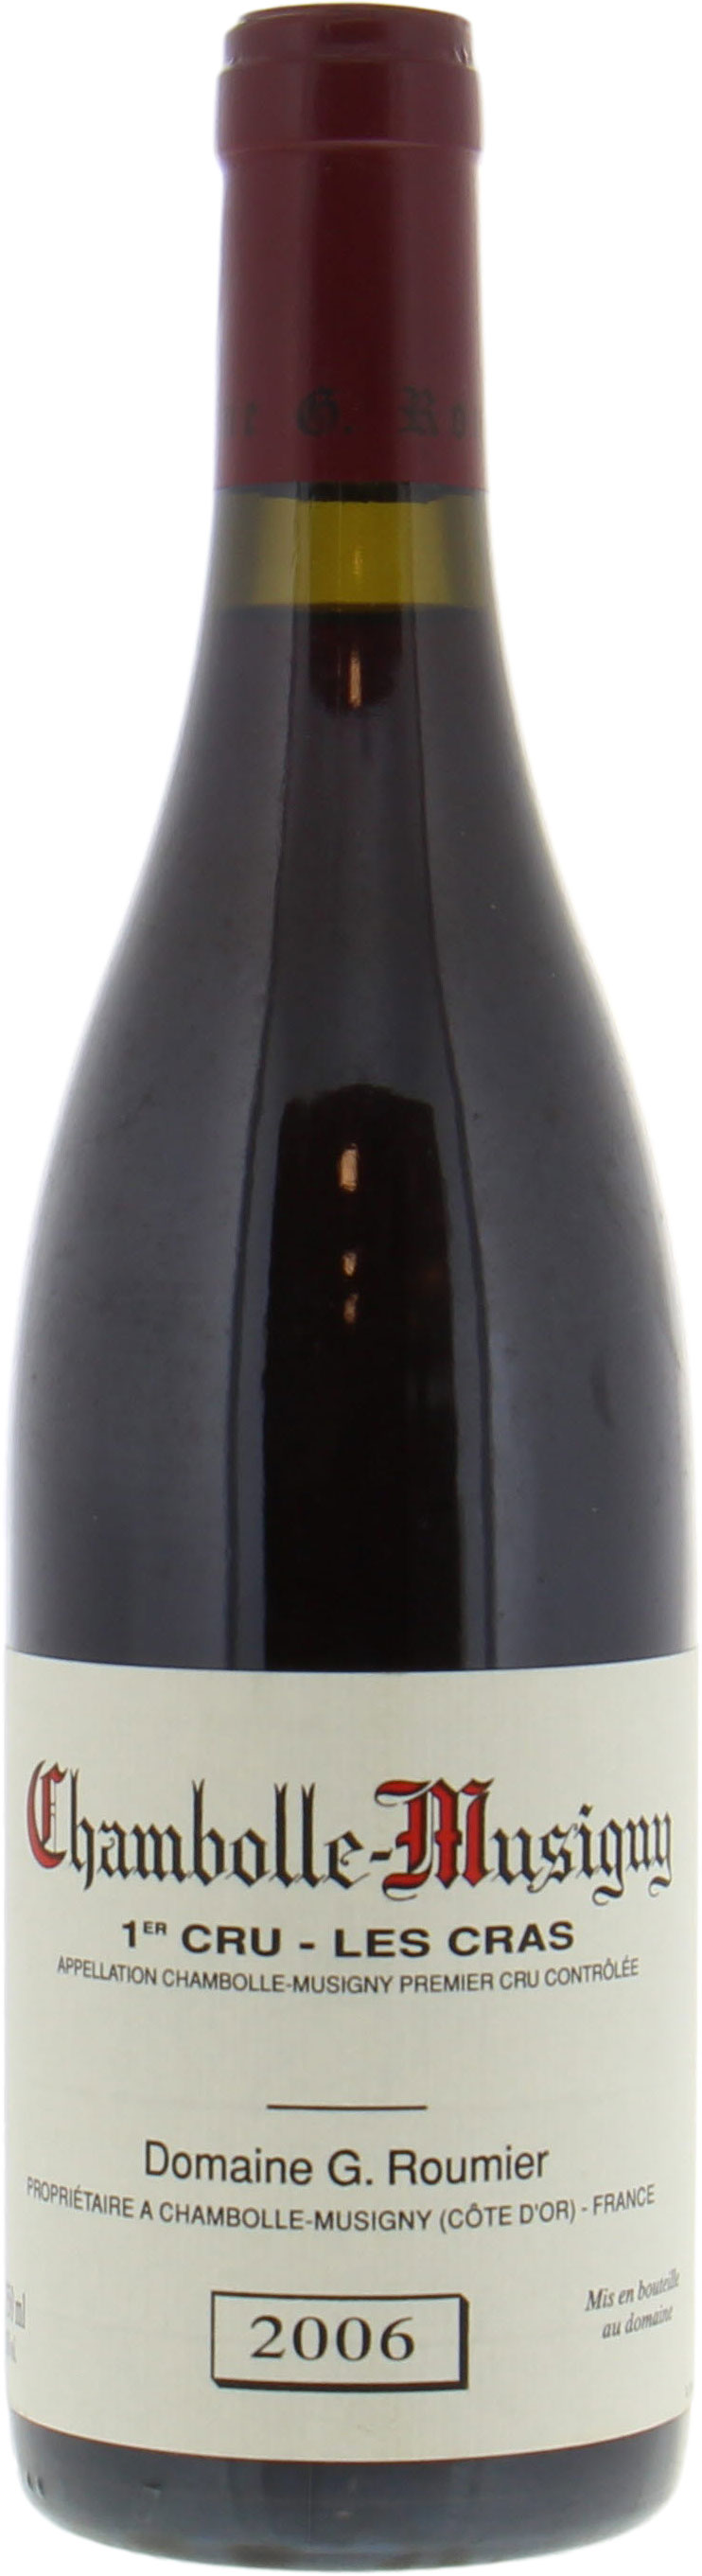 Georges Roumier - Chambolle Musigny les Cras 1cru 2006